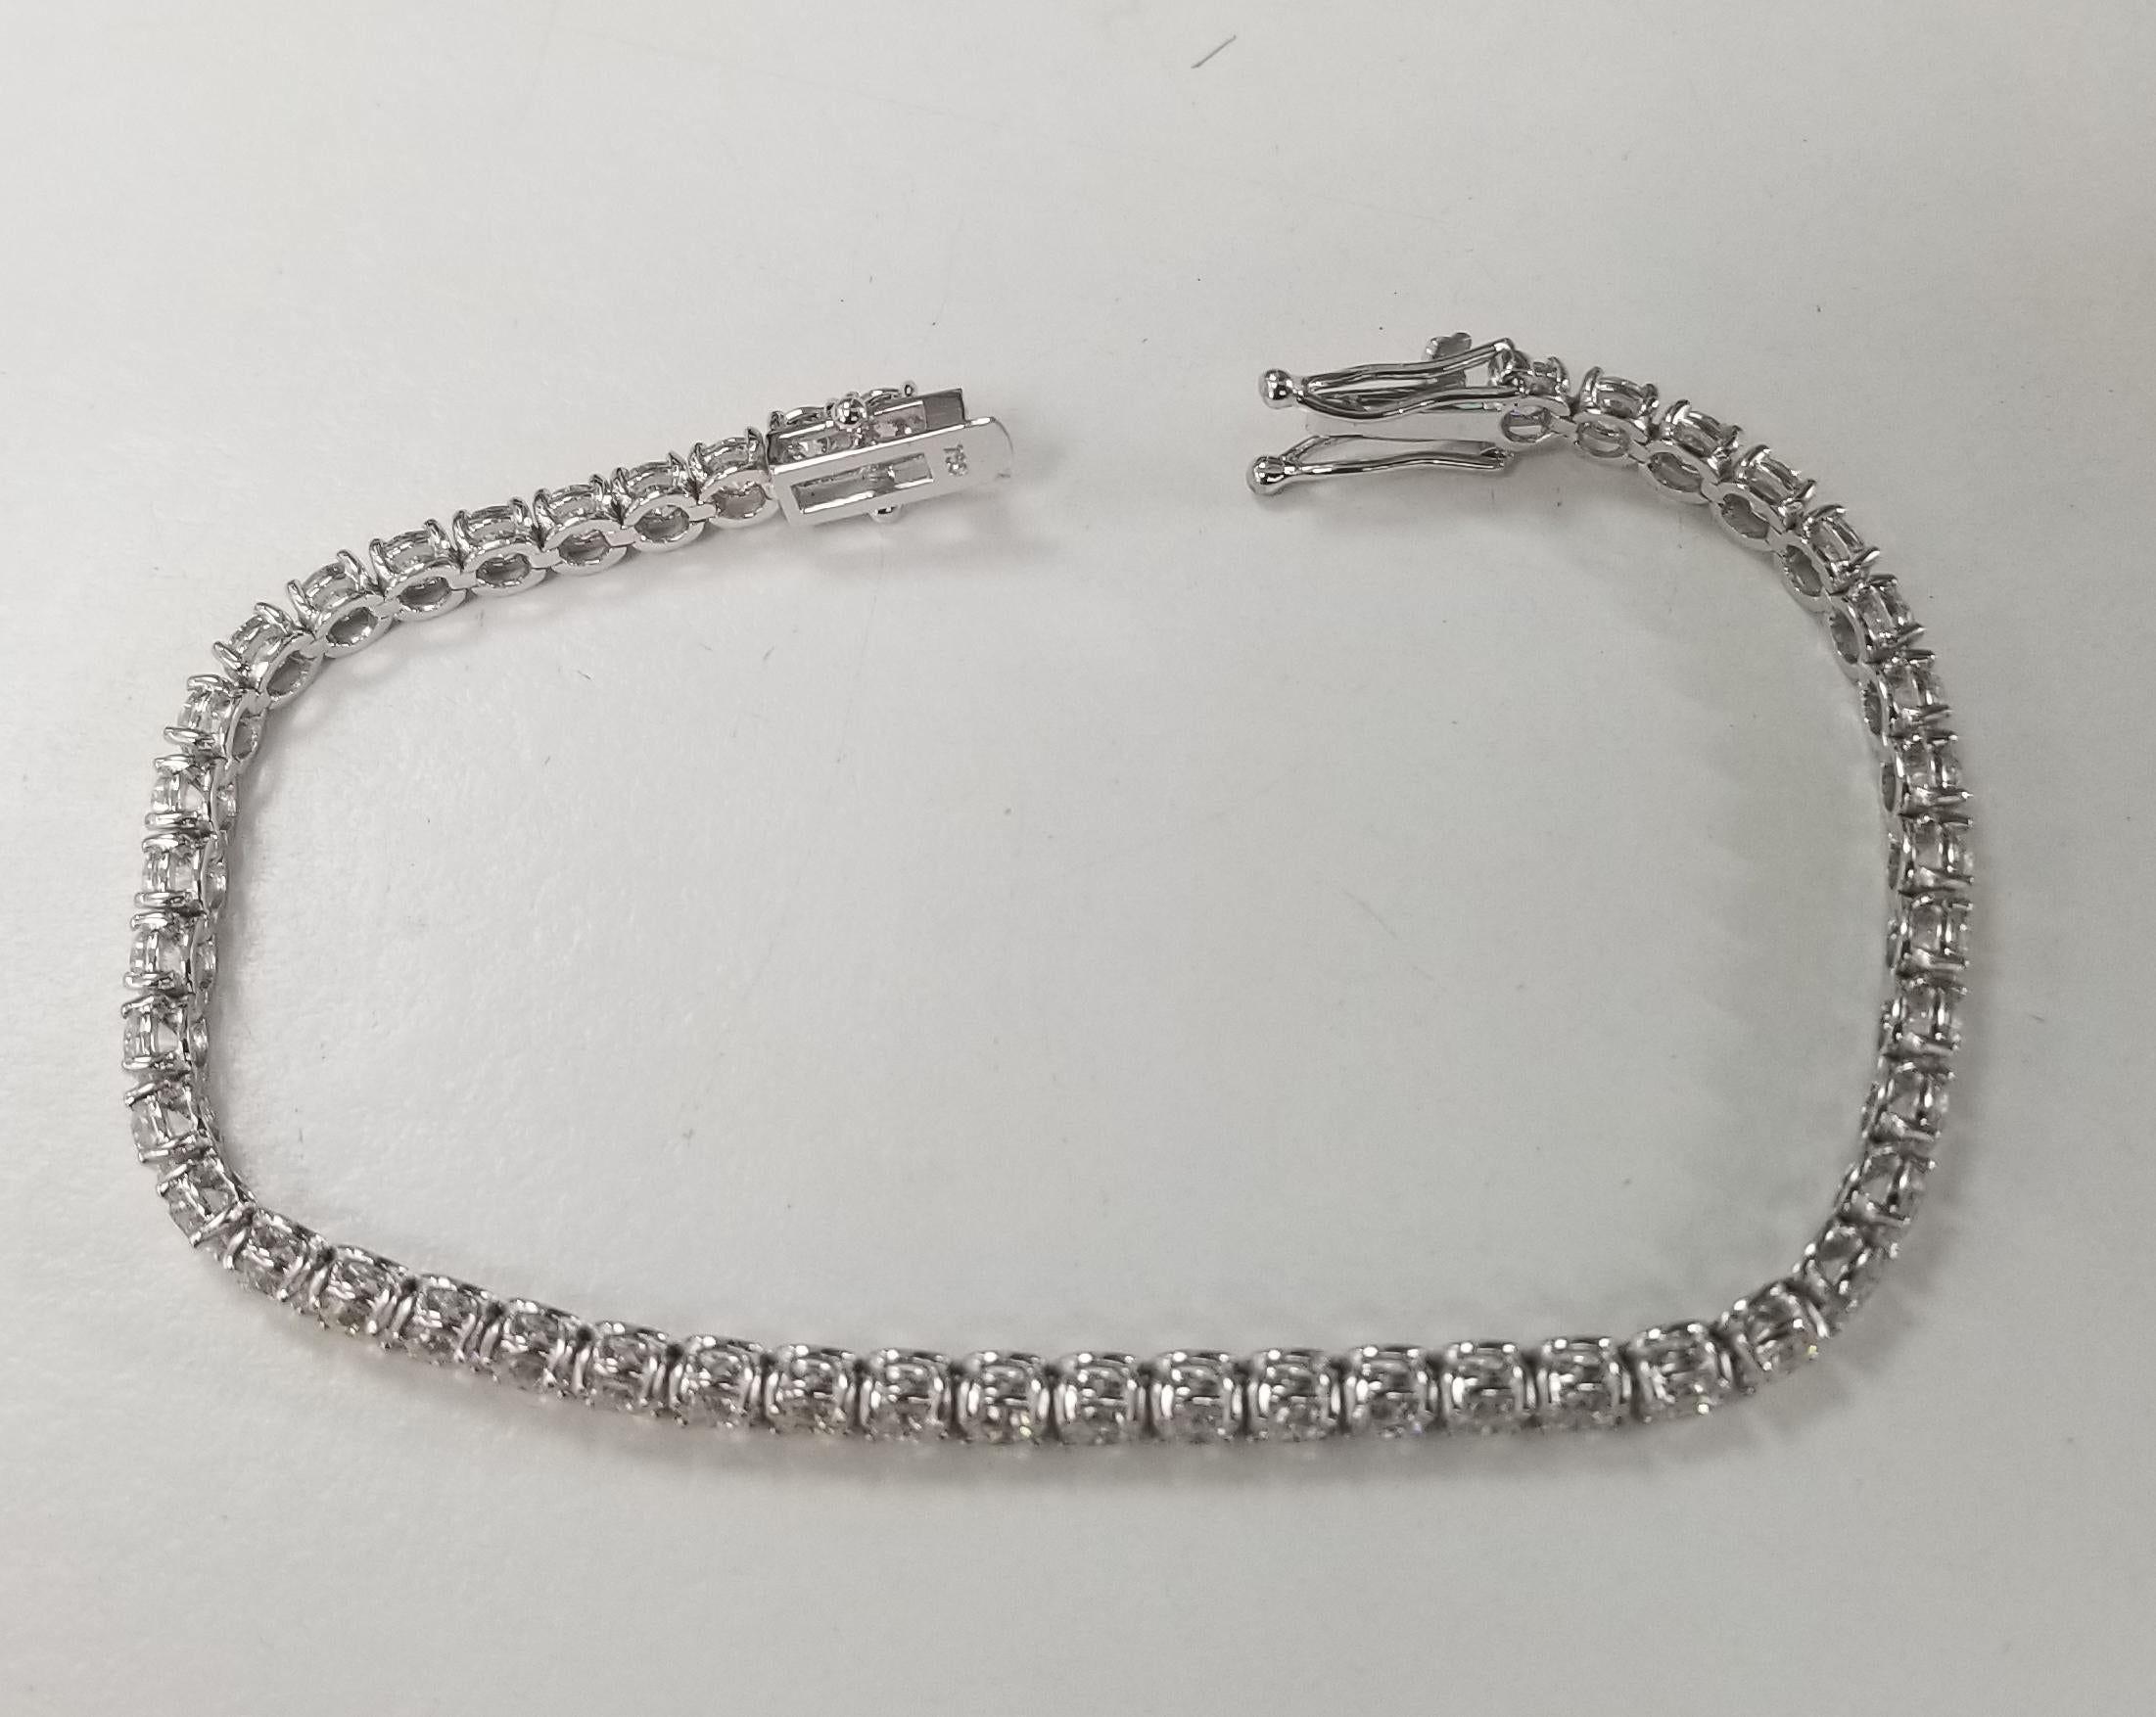 This is very beautiful 18k white gold custom made tennis bracelet with 47 round diamonds color F-G and clarity VS2-SI1 weighing 8.60cts. very fine quality diamonds, bracelet measures 7 inches with clasp and safety.
Specifications:
    main stone: